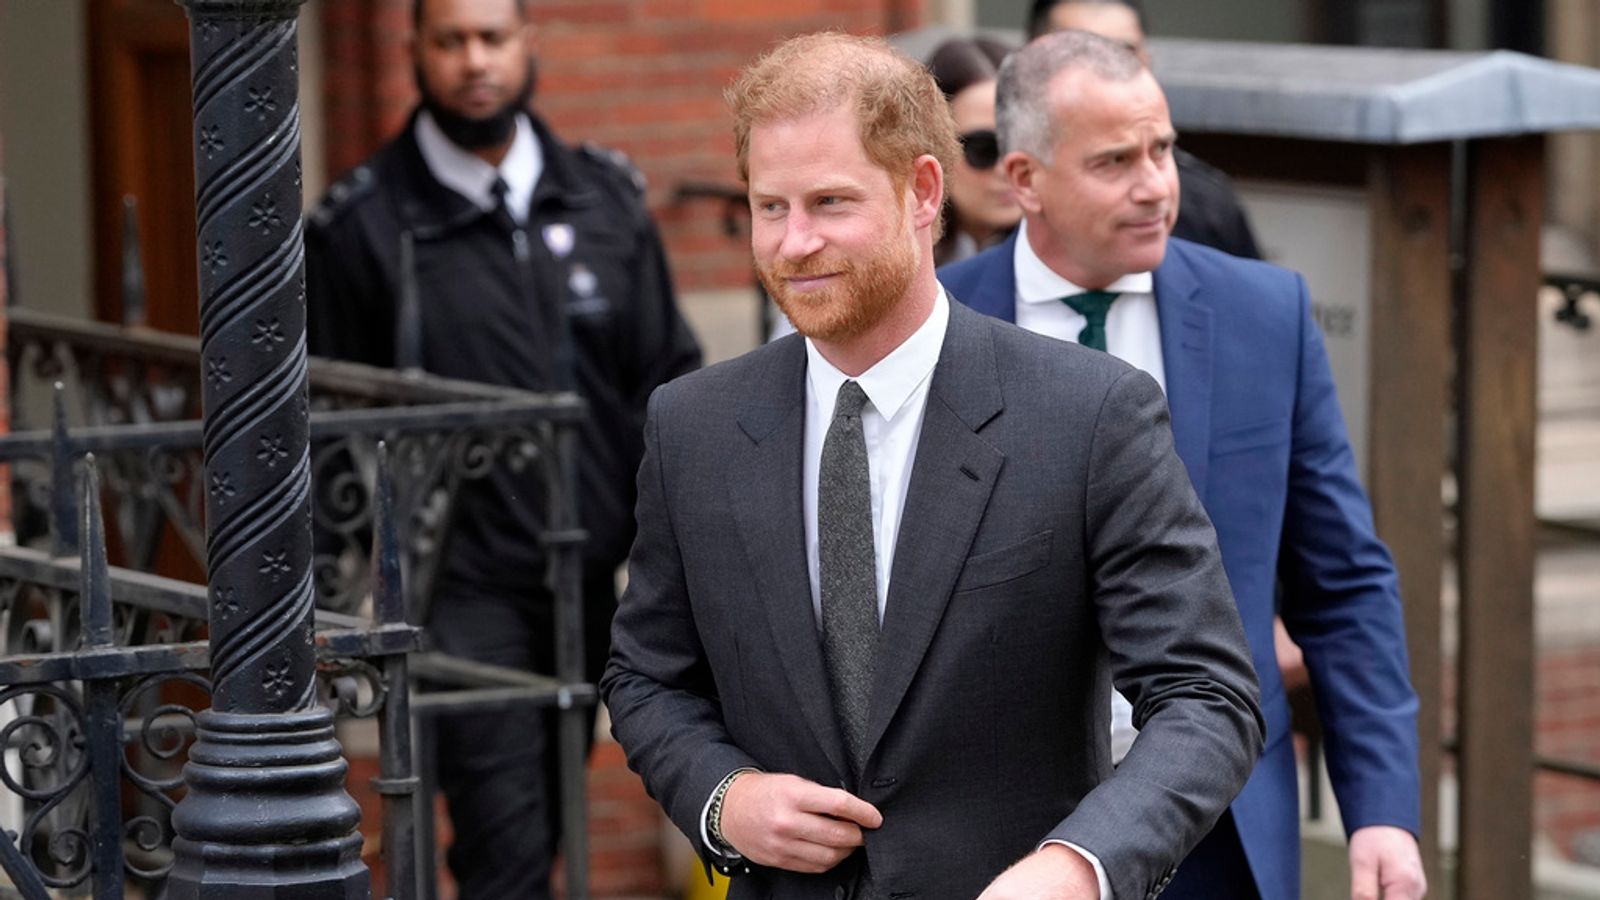 Prince Harry granted access to secret documents in phone hacking claim